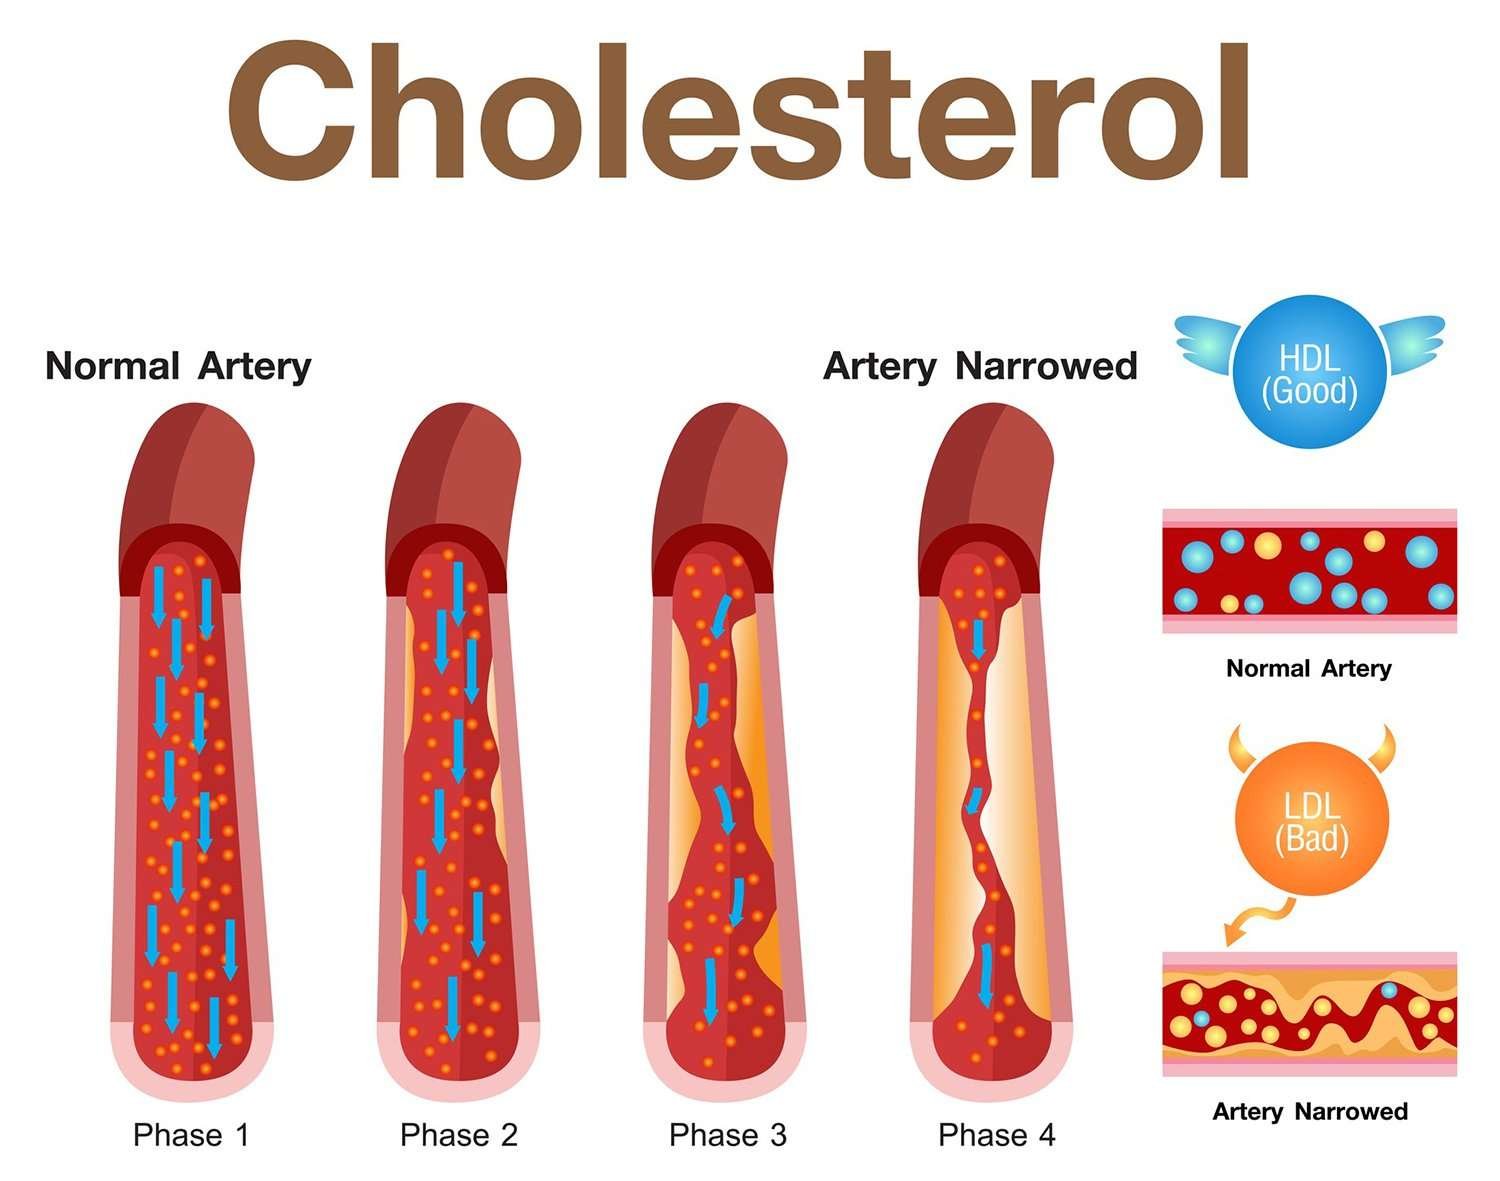 Which is good cholesterol? LDL or HDL?